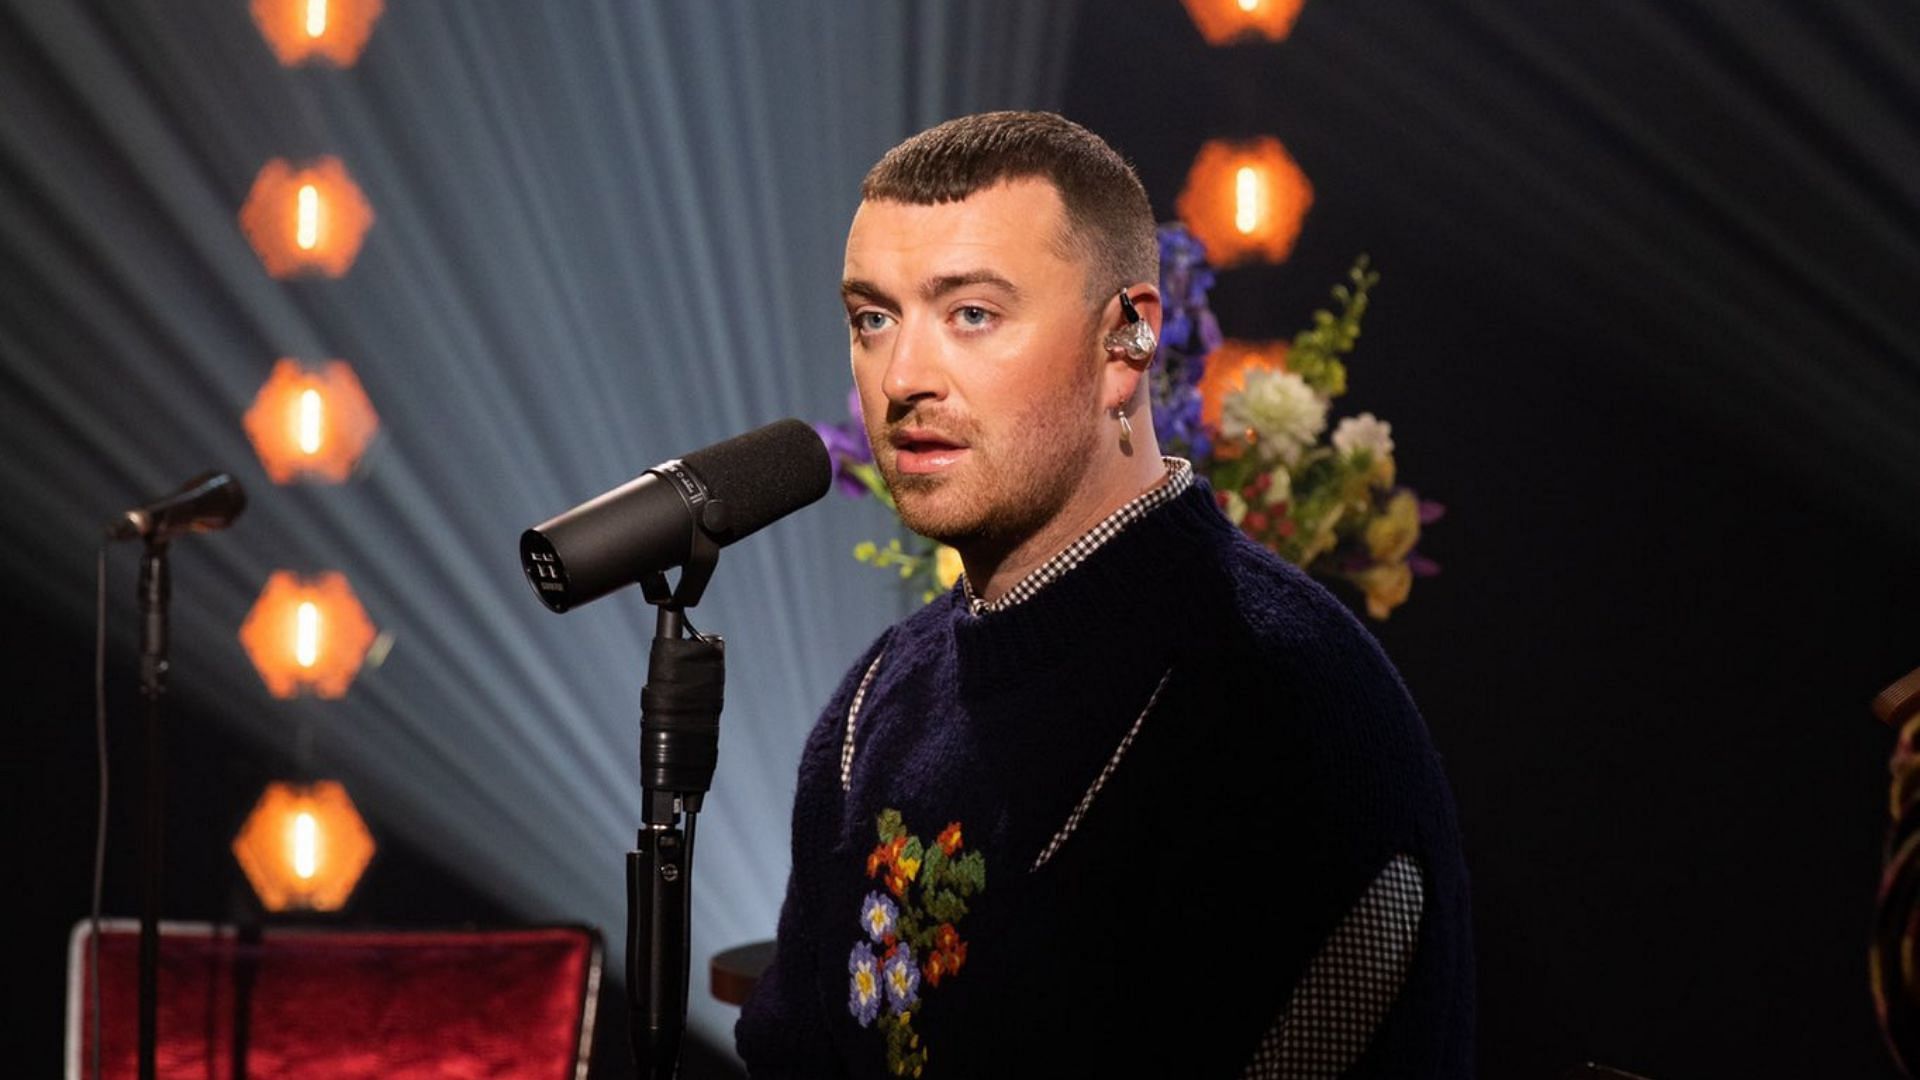 Singer Sam Smith came out as non-binary in 2019 (Image via @samsmith/Twitter)